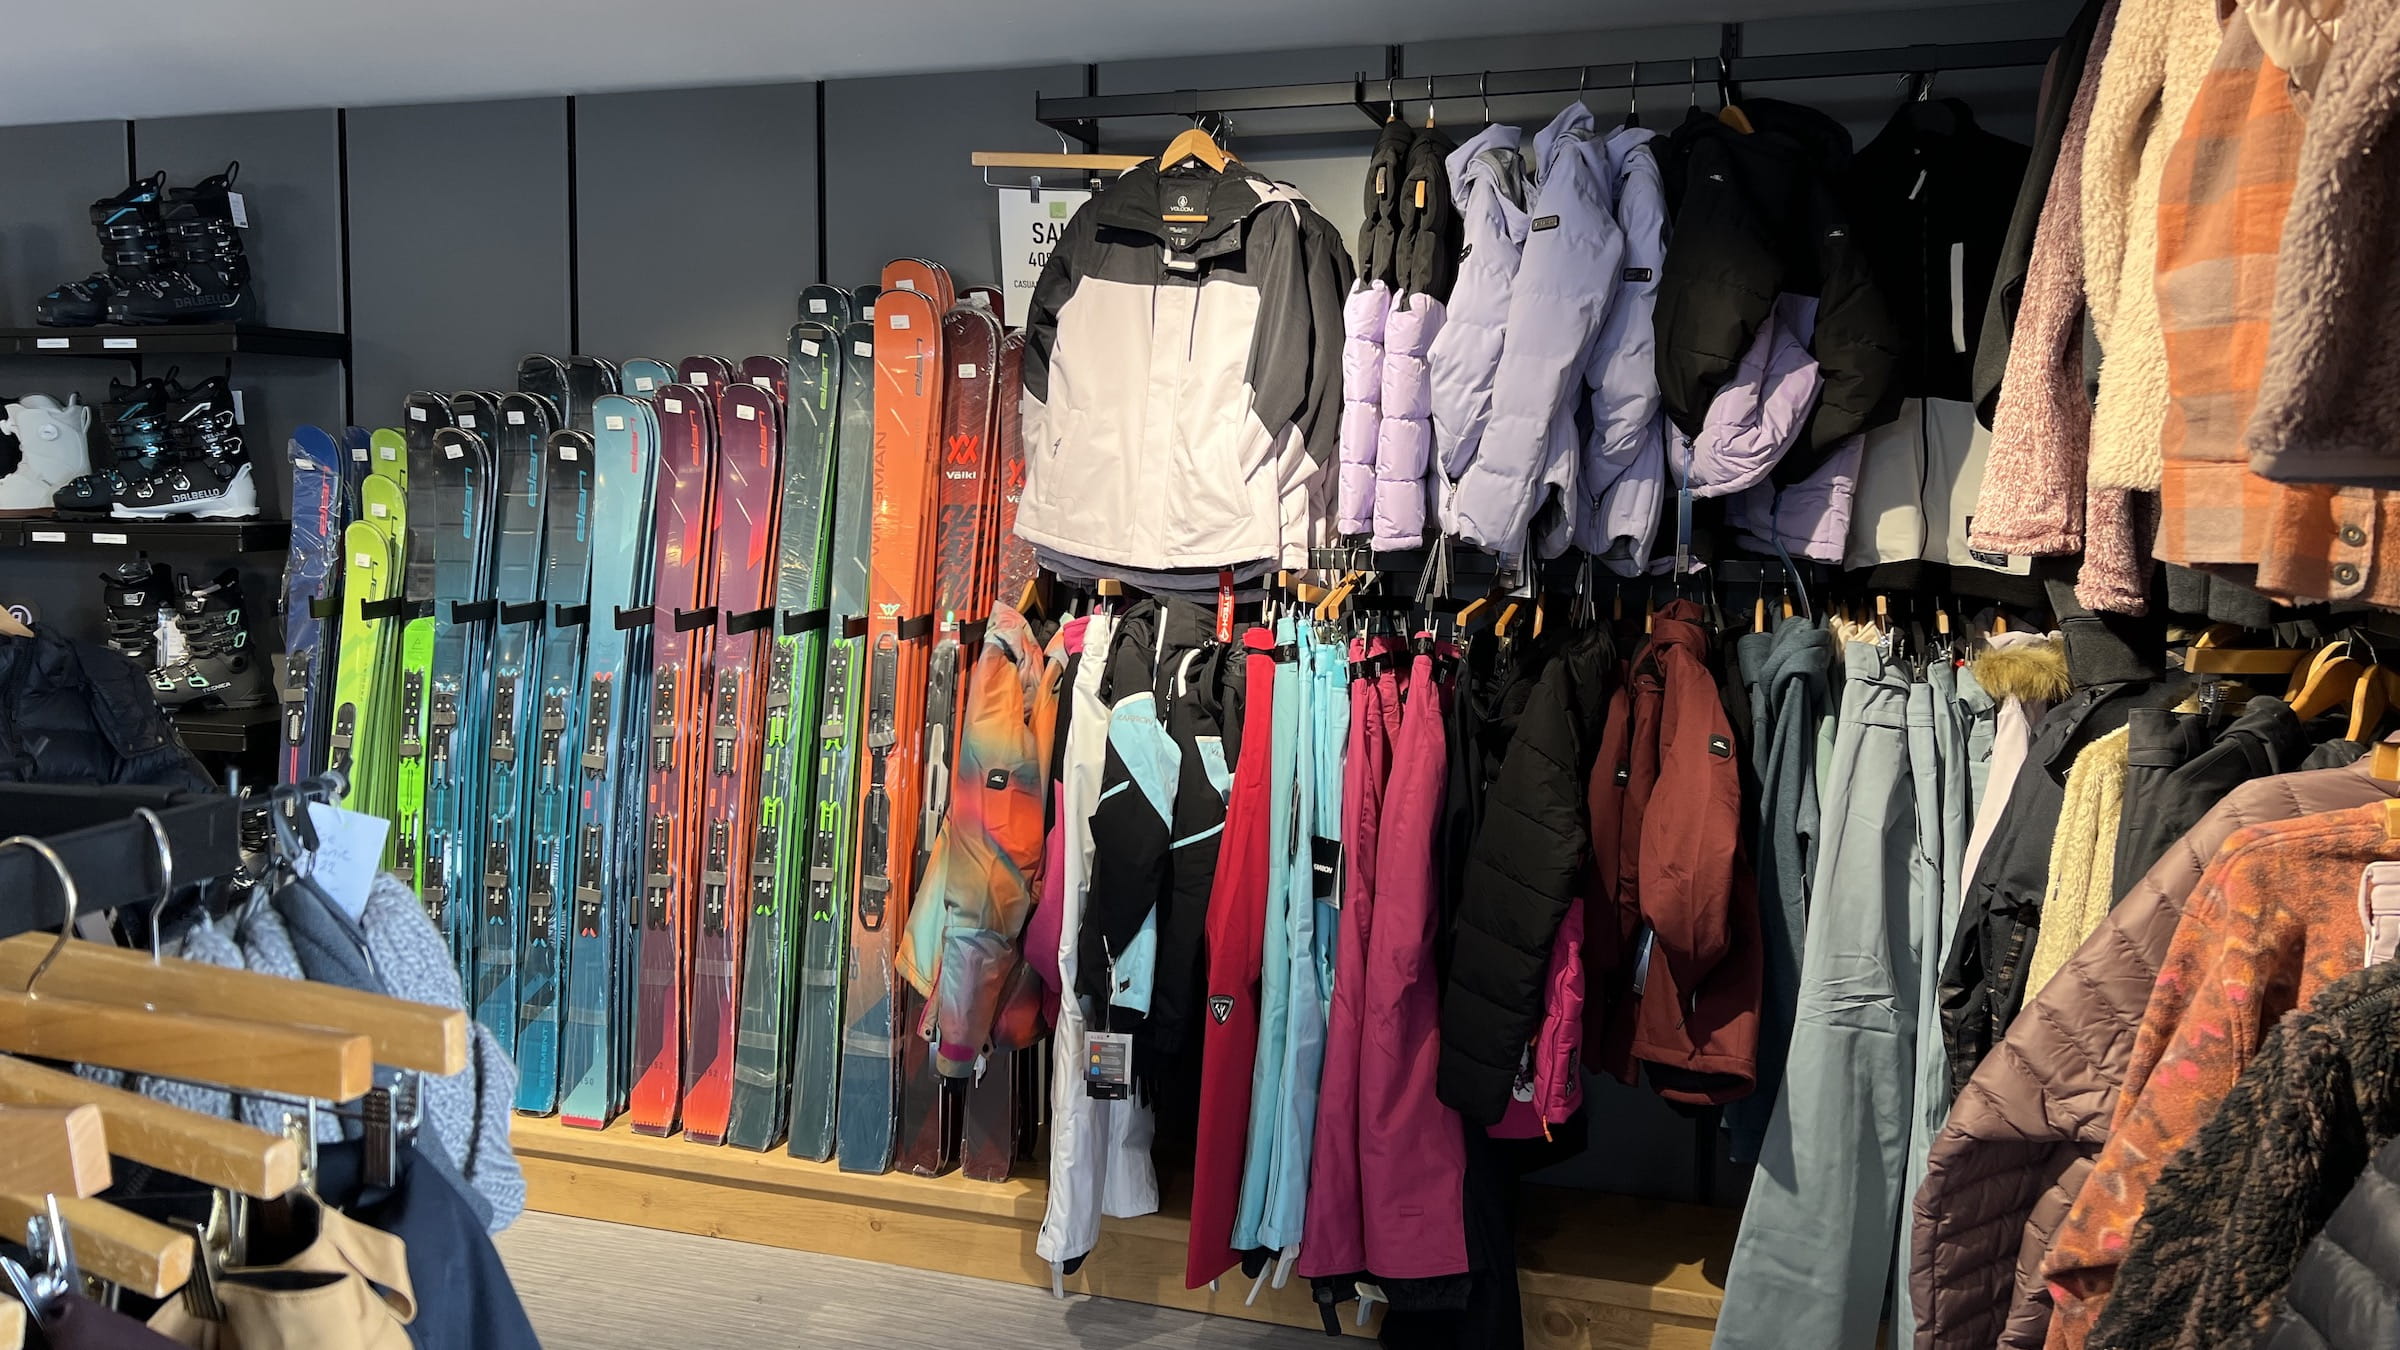 Skis, snowboards, and outerwear at Lifted Store for Shopping at Blue Mountain Resort